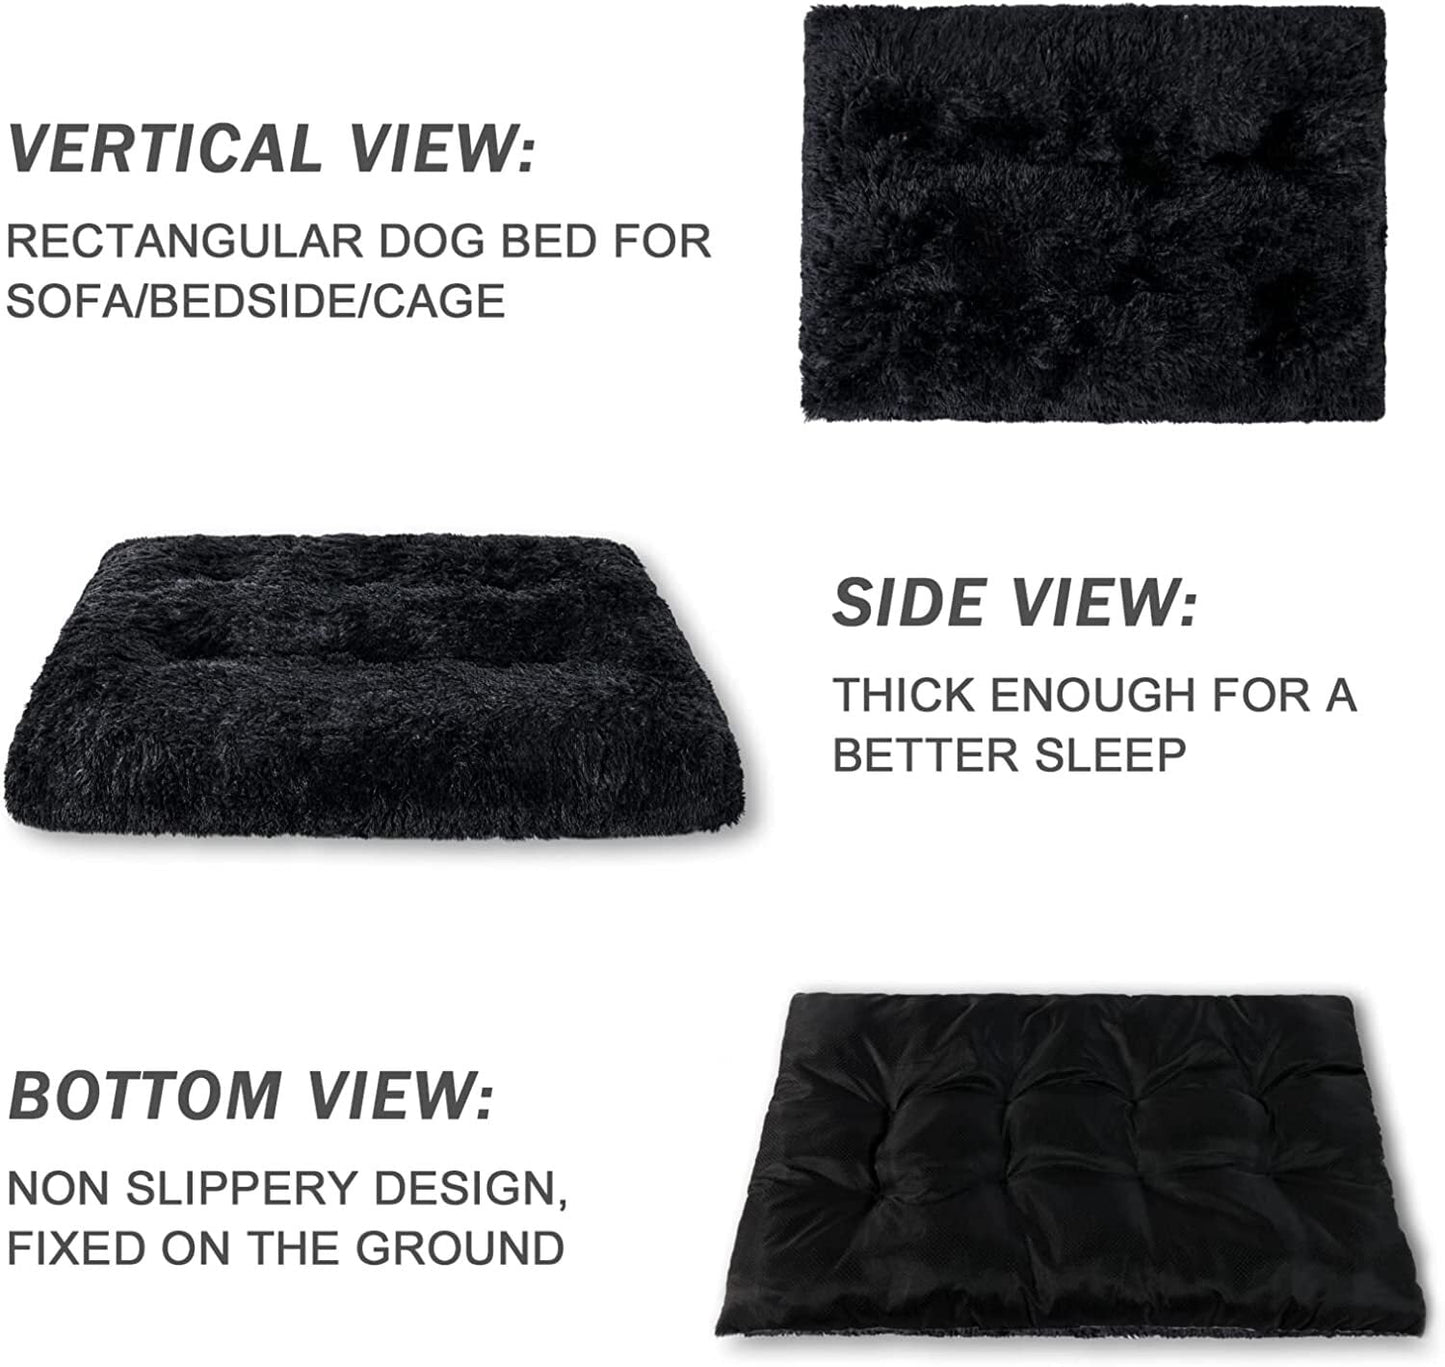 Exclusivo Mecla Soft Plush Dog Bed Crate Mat for Small Dogs (32*22*4 in), Faux Fur Fluffy Dog Pet Cat Kennel Pad with Anti-Slip Bottom, Machine Washable Black